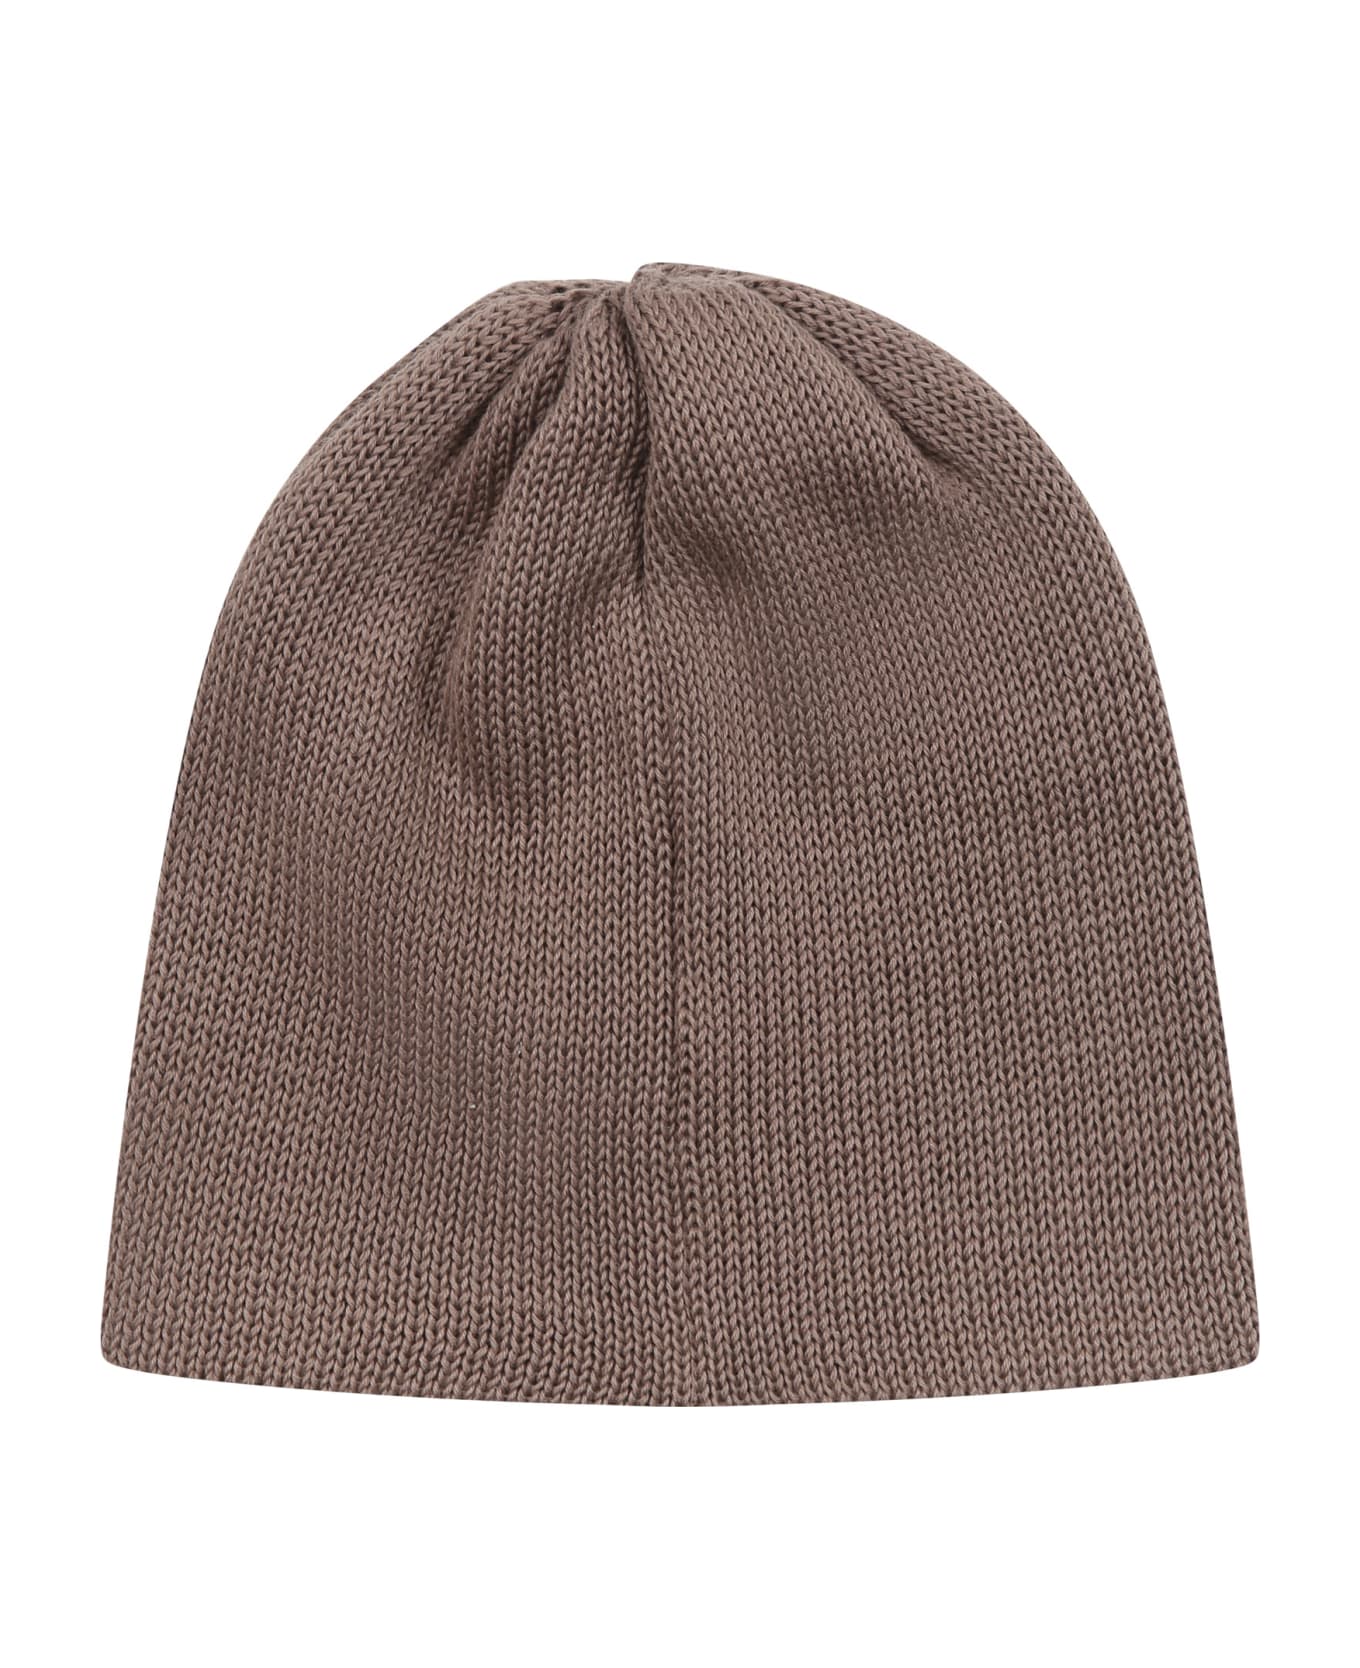 Little Bear Brown Hat For Baby Kids - Brown